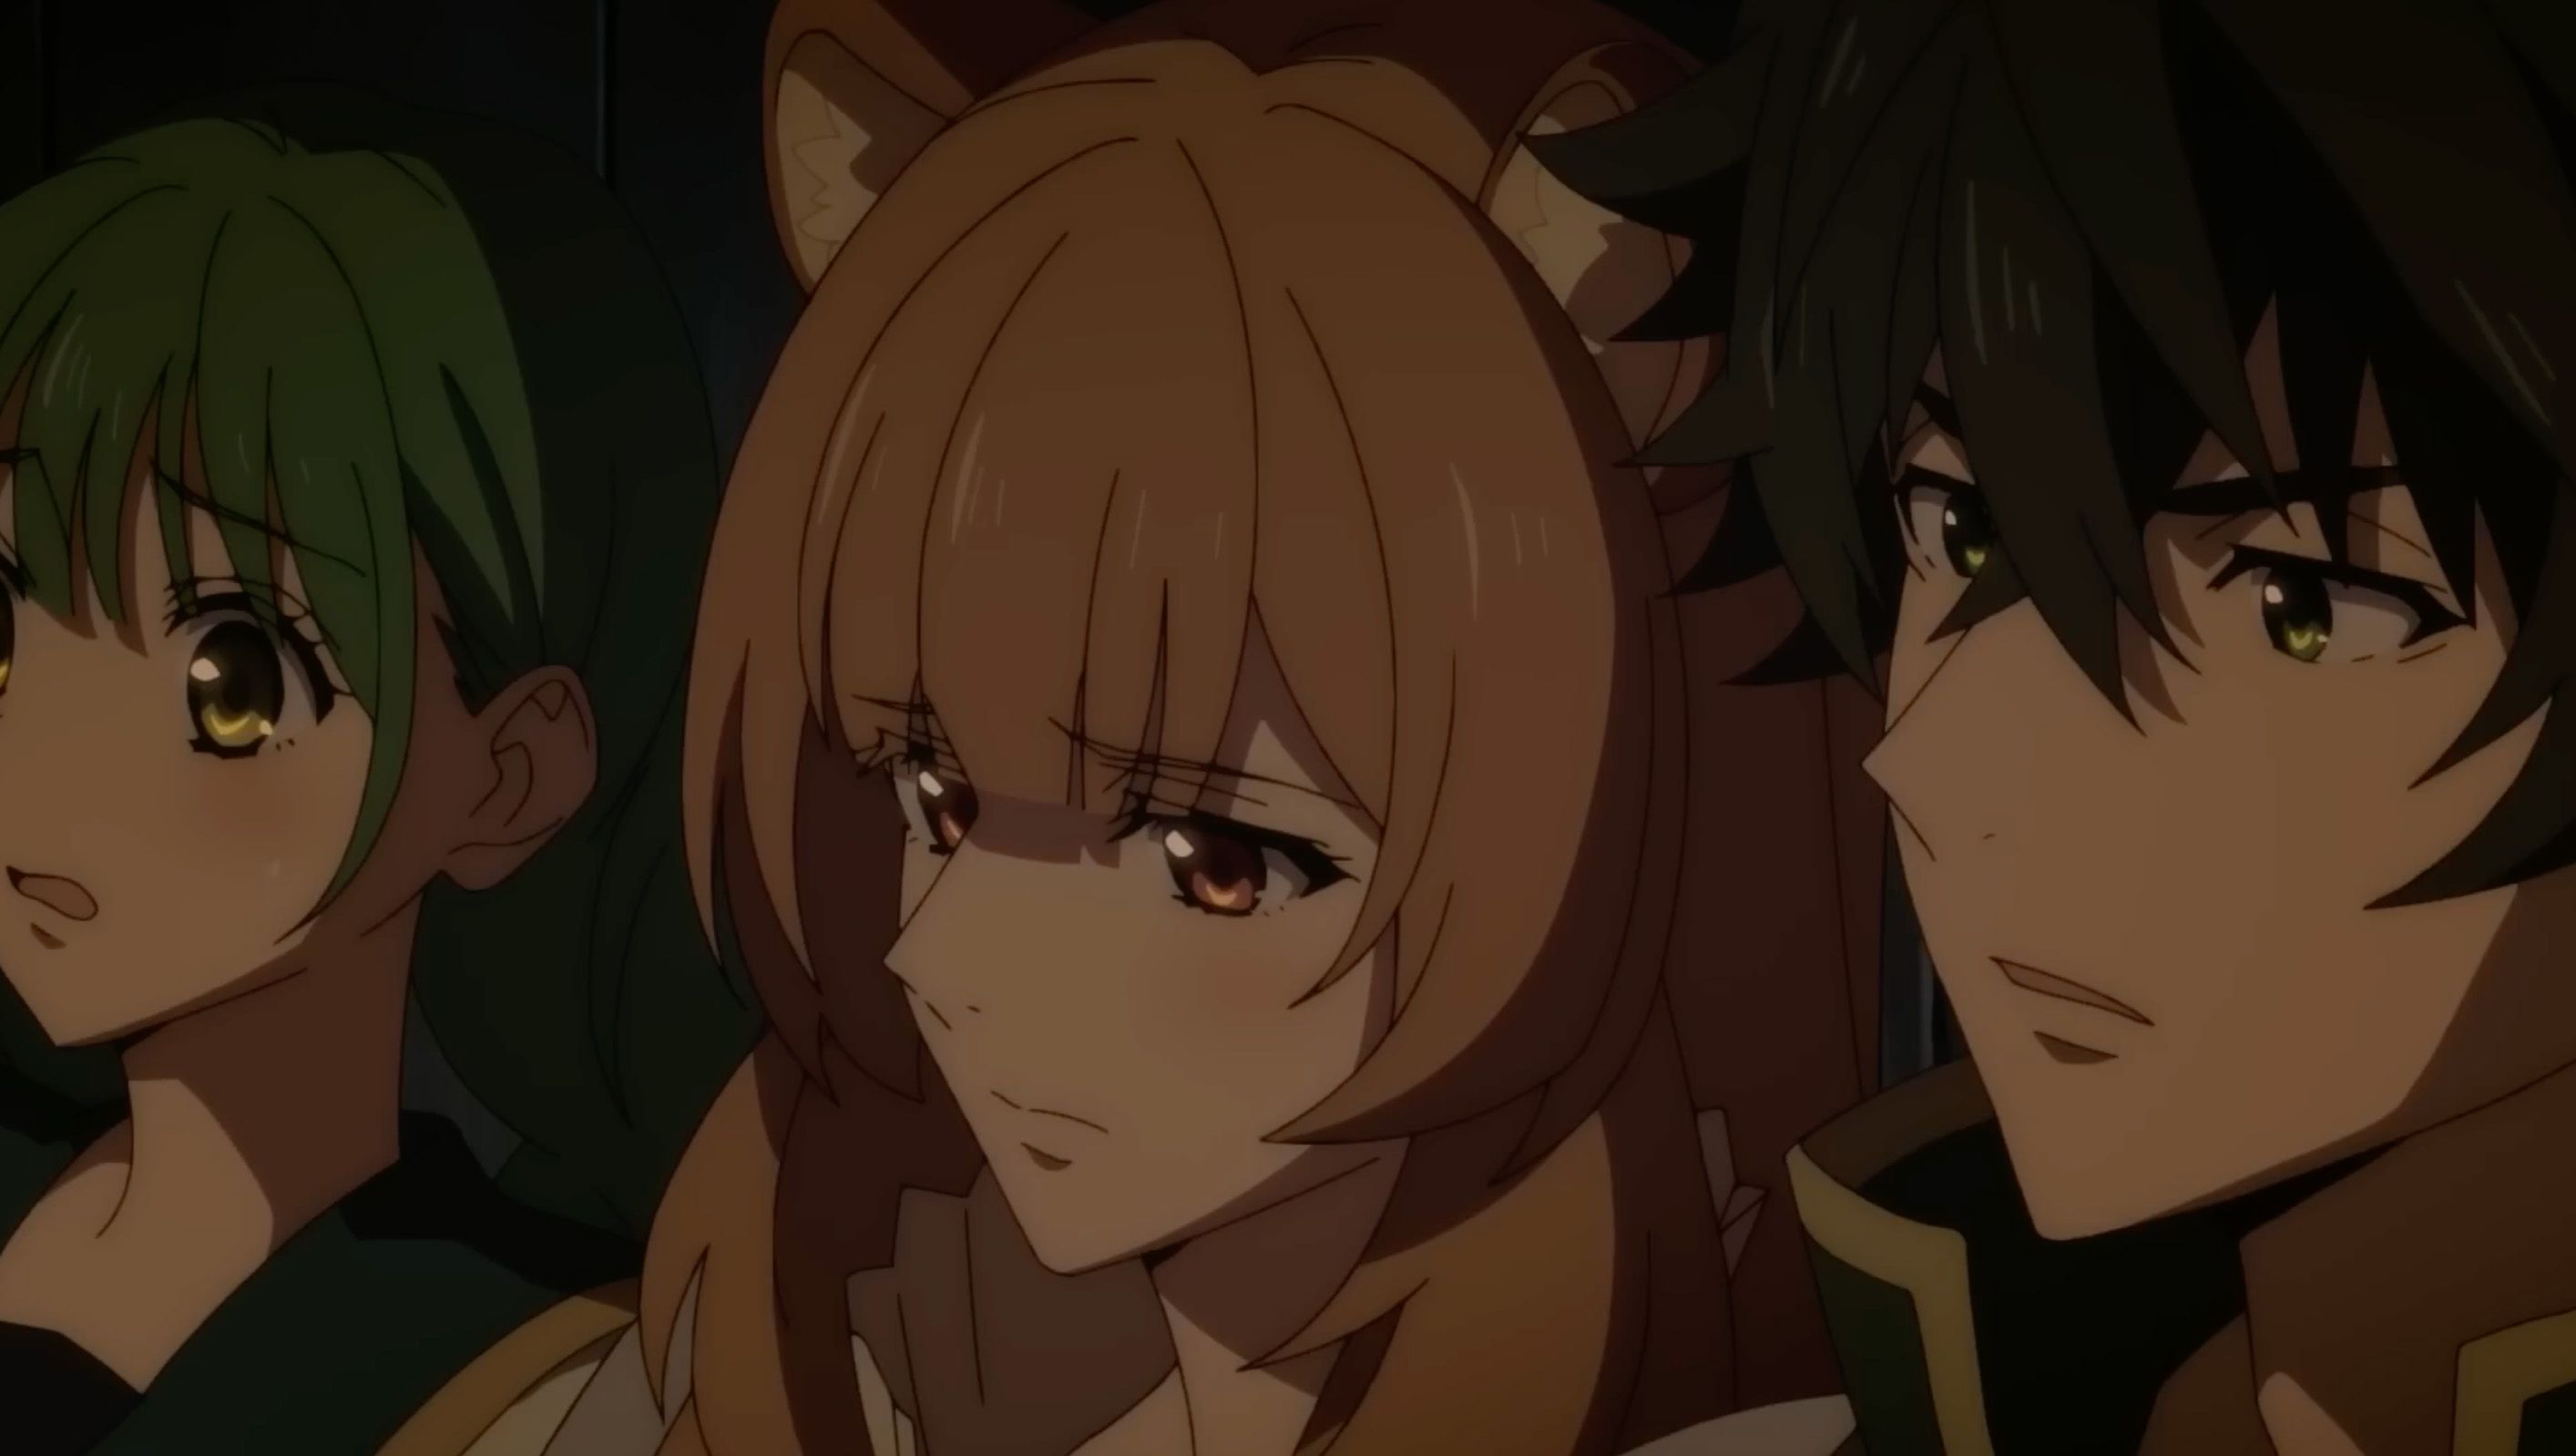 The Rising Of The Shield Hero Season 3 Release Date & Everything